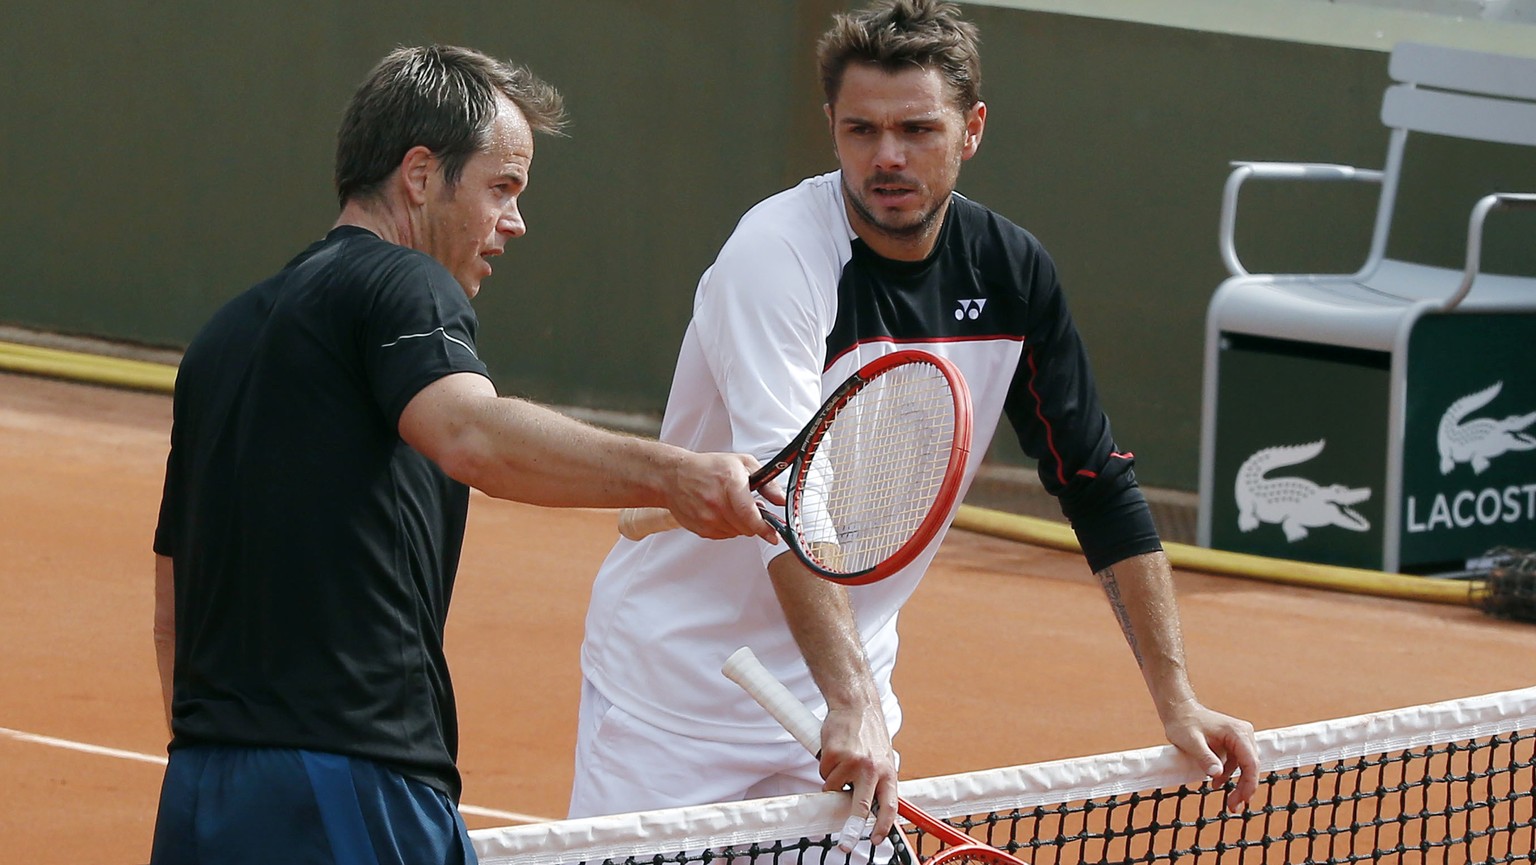 FILE - In this May 24, 2014, file photo, Stanislas Wawrinka, right, listening to his coach Magnus Norman during a training session for the French Open tennis tournament at Roland Garros in Paris. Wawr ...